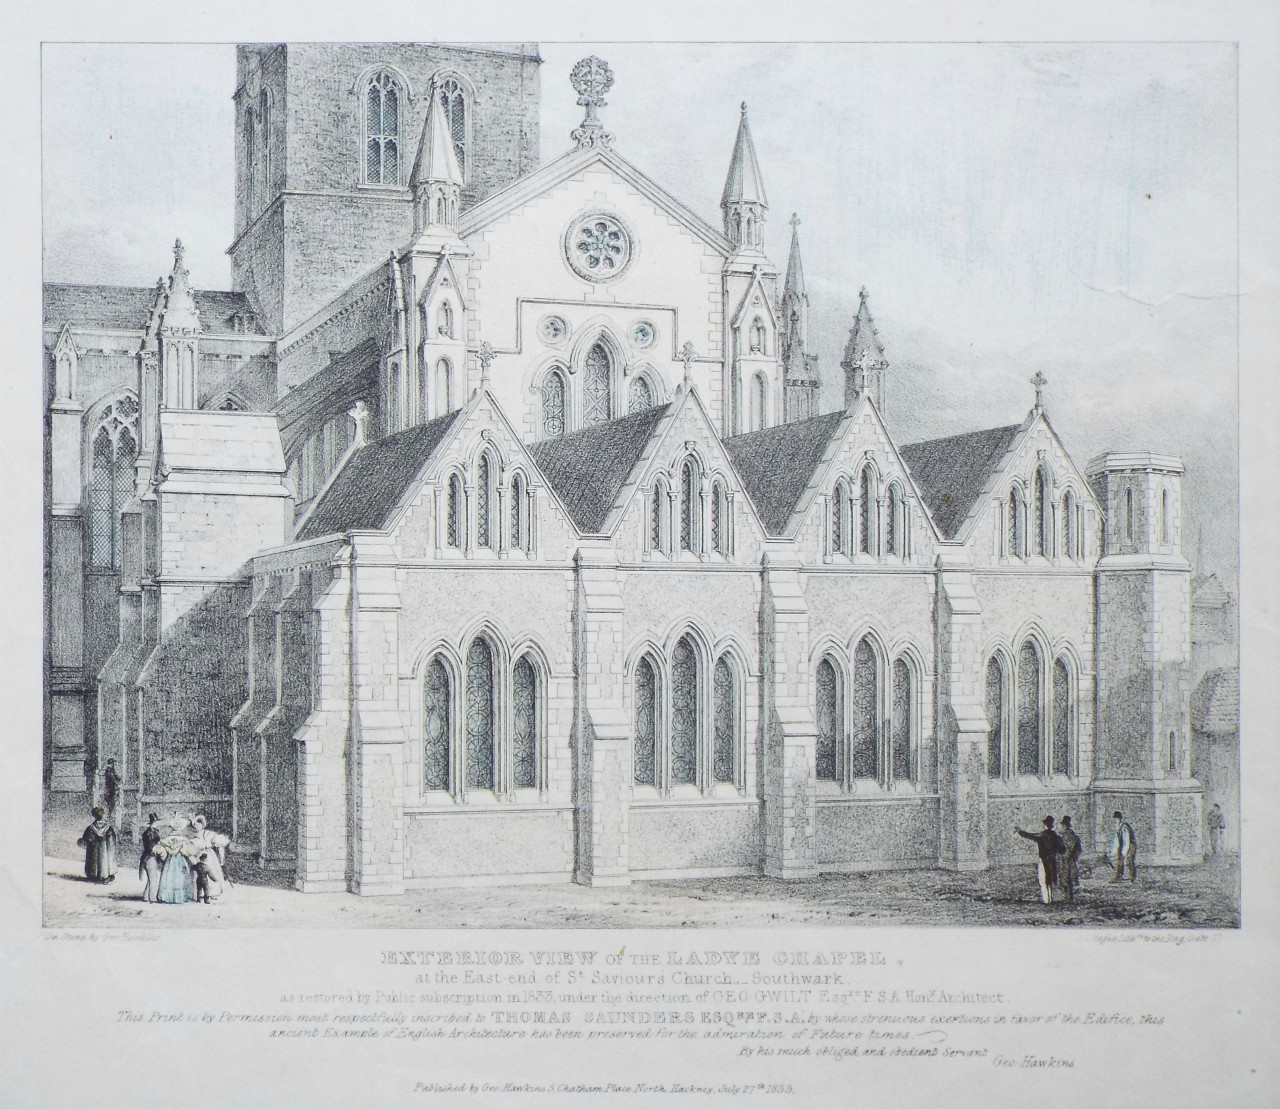 Lithograph - Exterior View of the Ladye Chapel, at the East end of St. Saviour's Church, Southwark, as restored by Public subscription in 1833, under the direction of Geo Gwilt Esqre F.S.A. Hony. Architect. - Hawkins